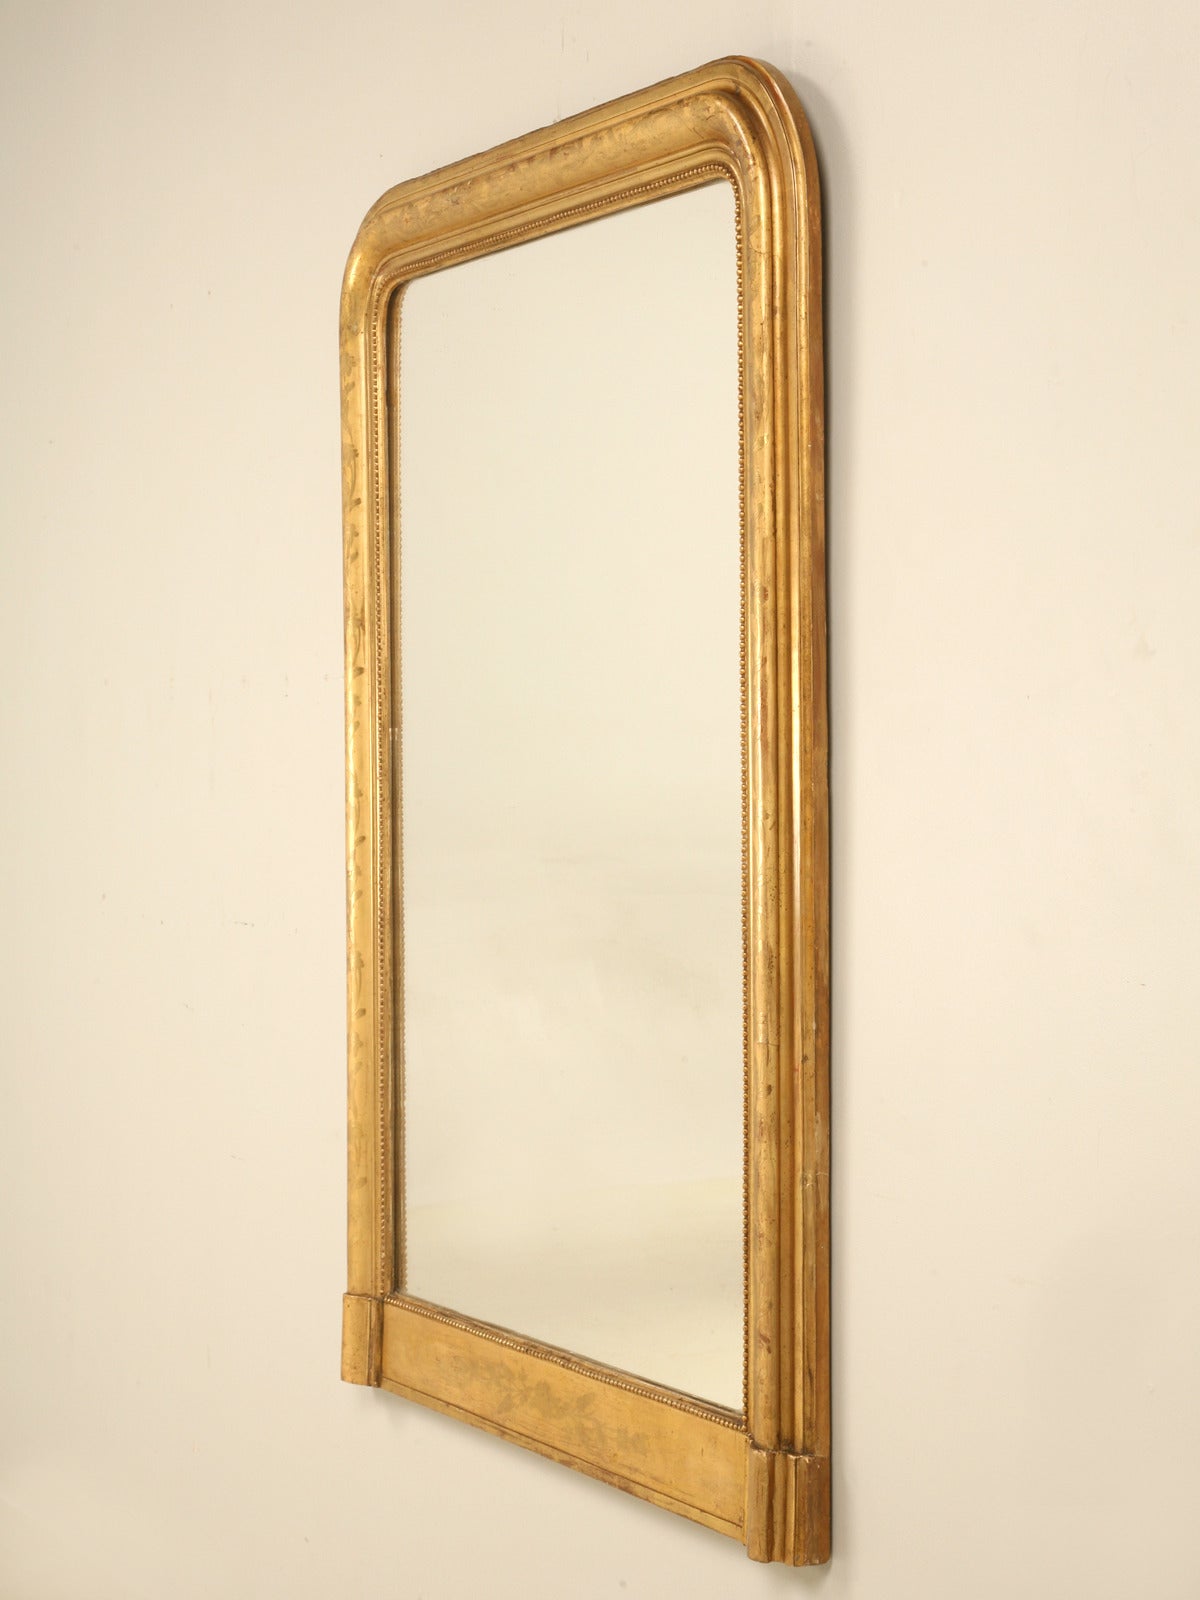 An absolutely all original Louis Philippe style mirror with its original water gilded frame with intricate detailing. Generally we see these frames where someone has used rub and buff, or that old gold radiator paint and ruined any ounce of patina